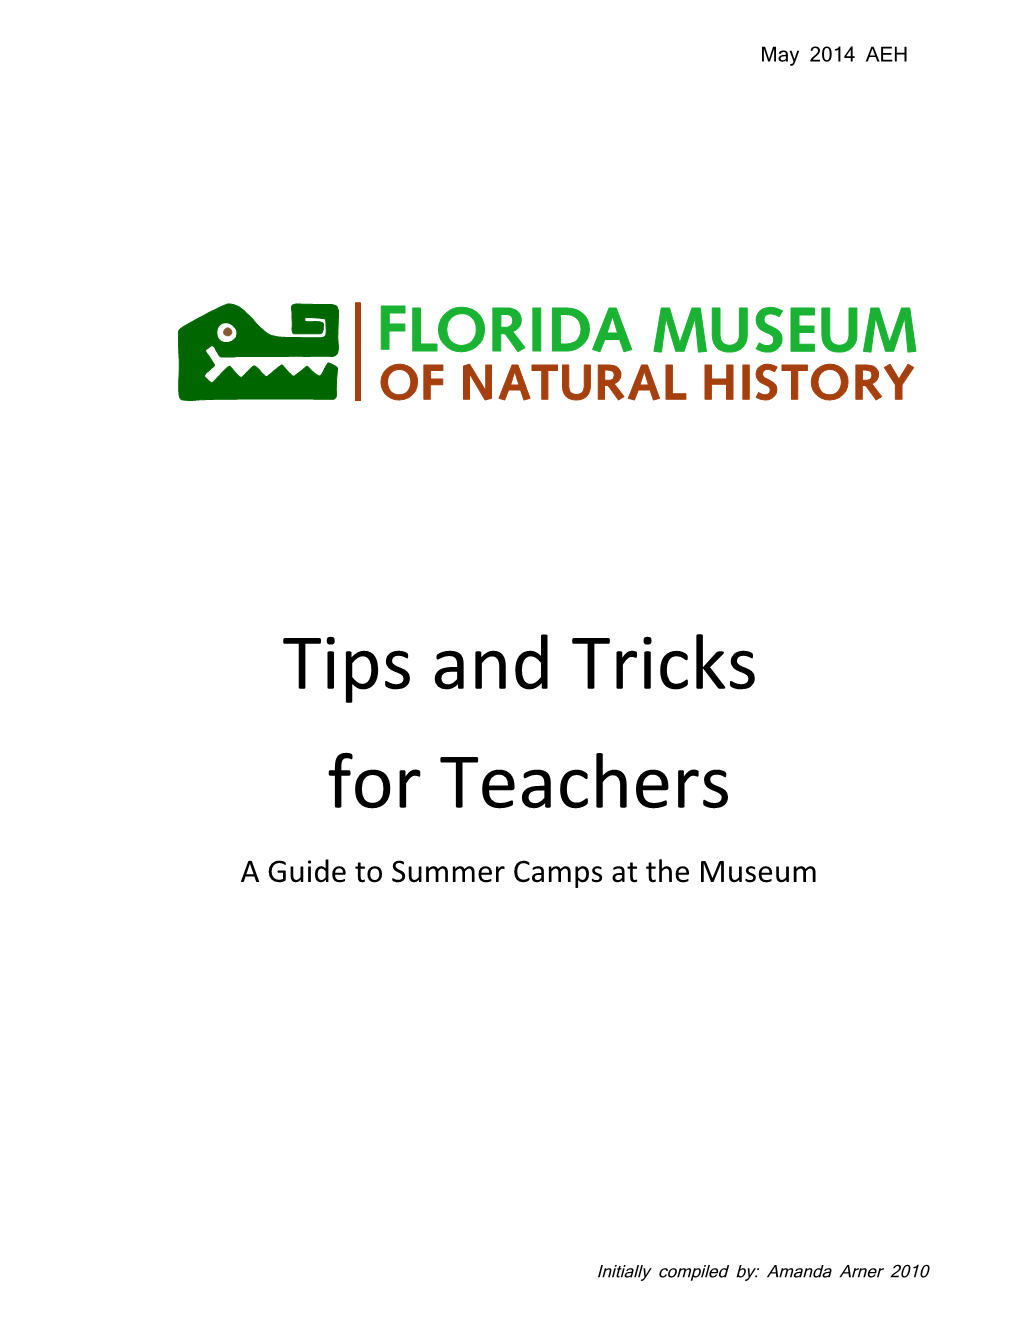 Tips and Tricks for Summer Camp Teachers